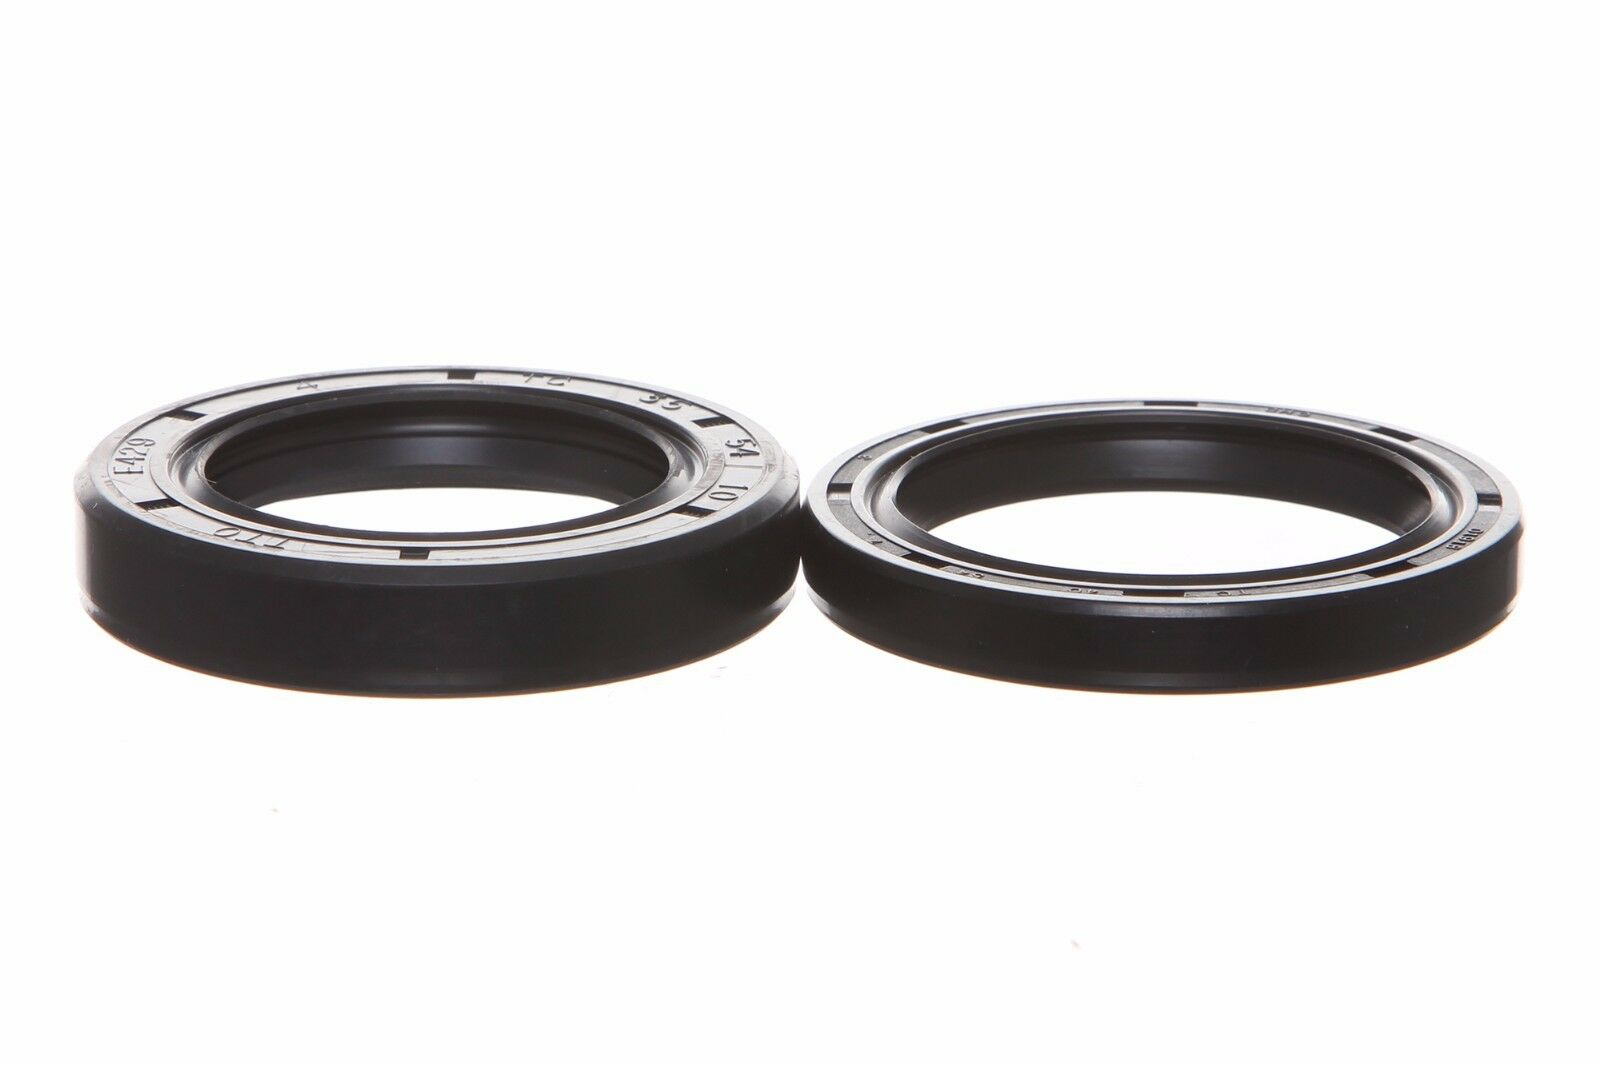 40hp & 50hp Rotary Cutter Gearbox Seal Set, Includes 1 Each Input & Output Seals